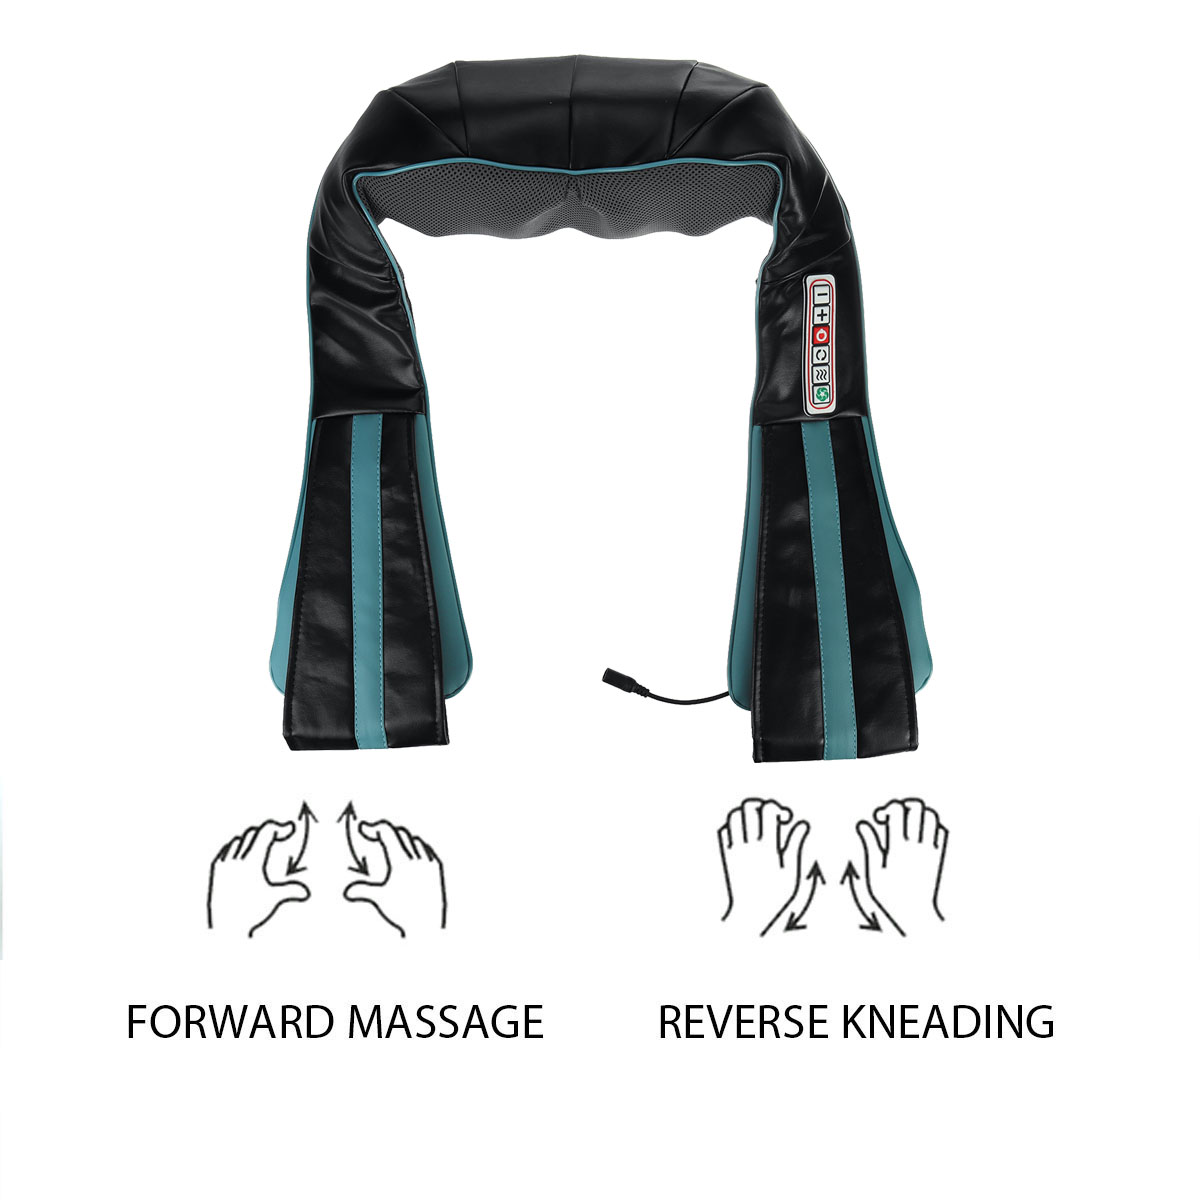 Intelligent-6-key-Button-Operation-Massage-Shawl-High-Temperature-Protection-Electric-Heating-Neck-B-1932348-4